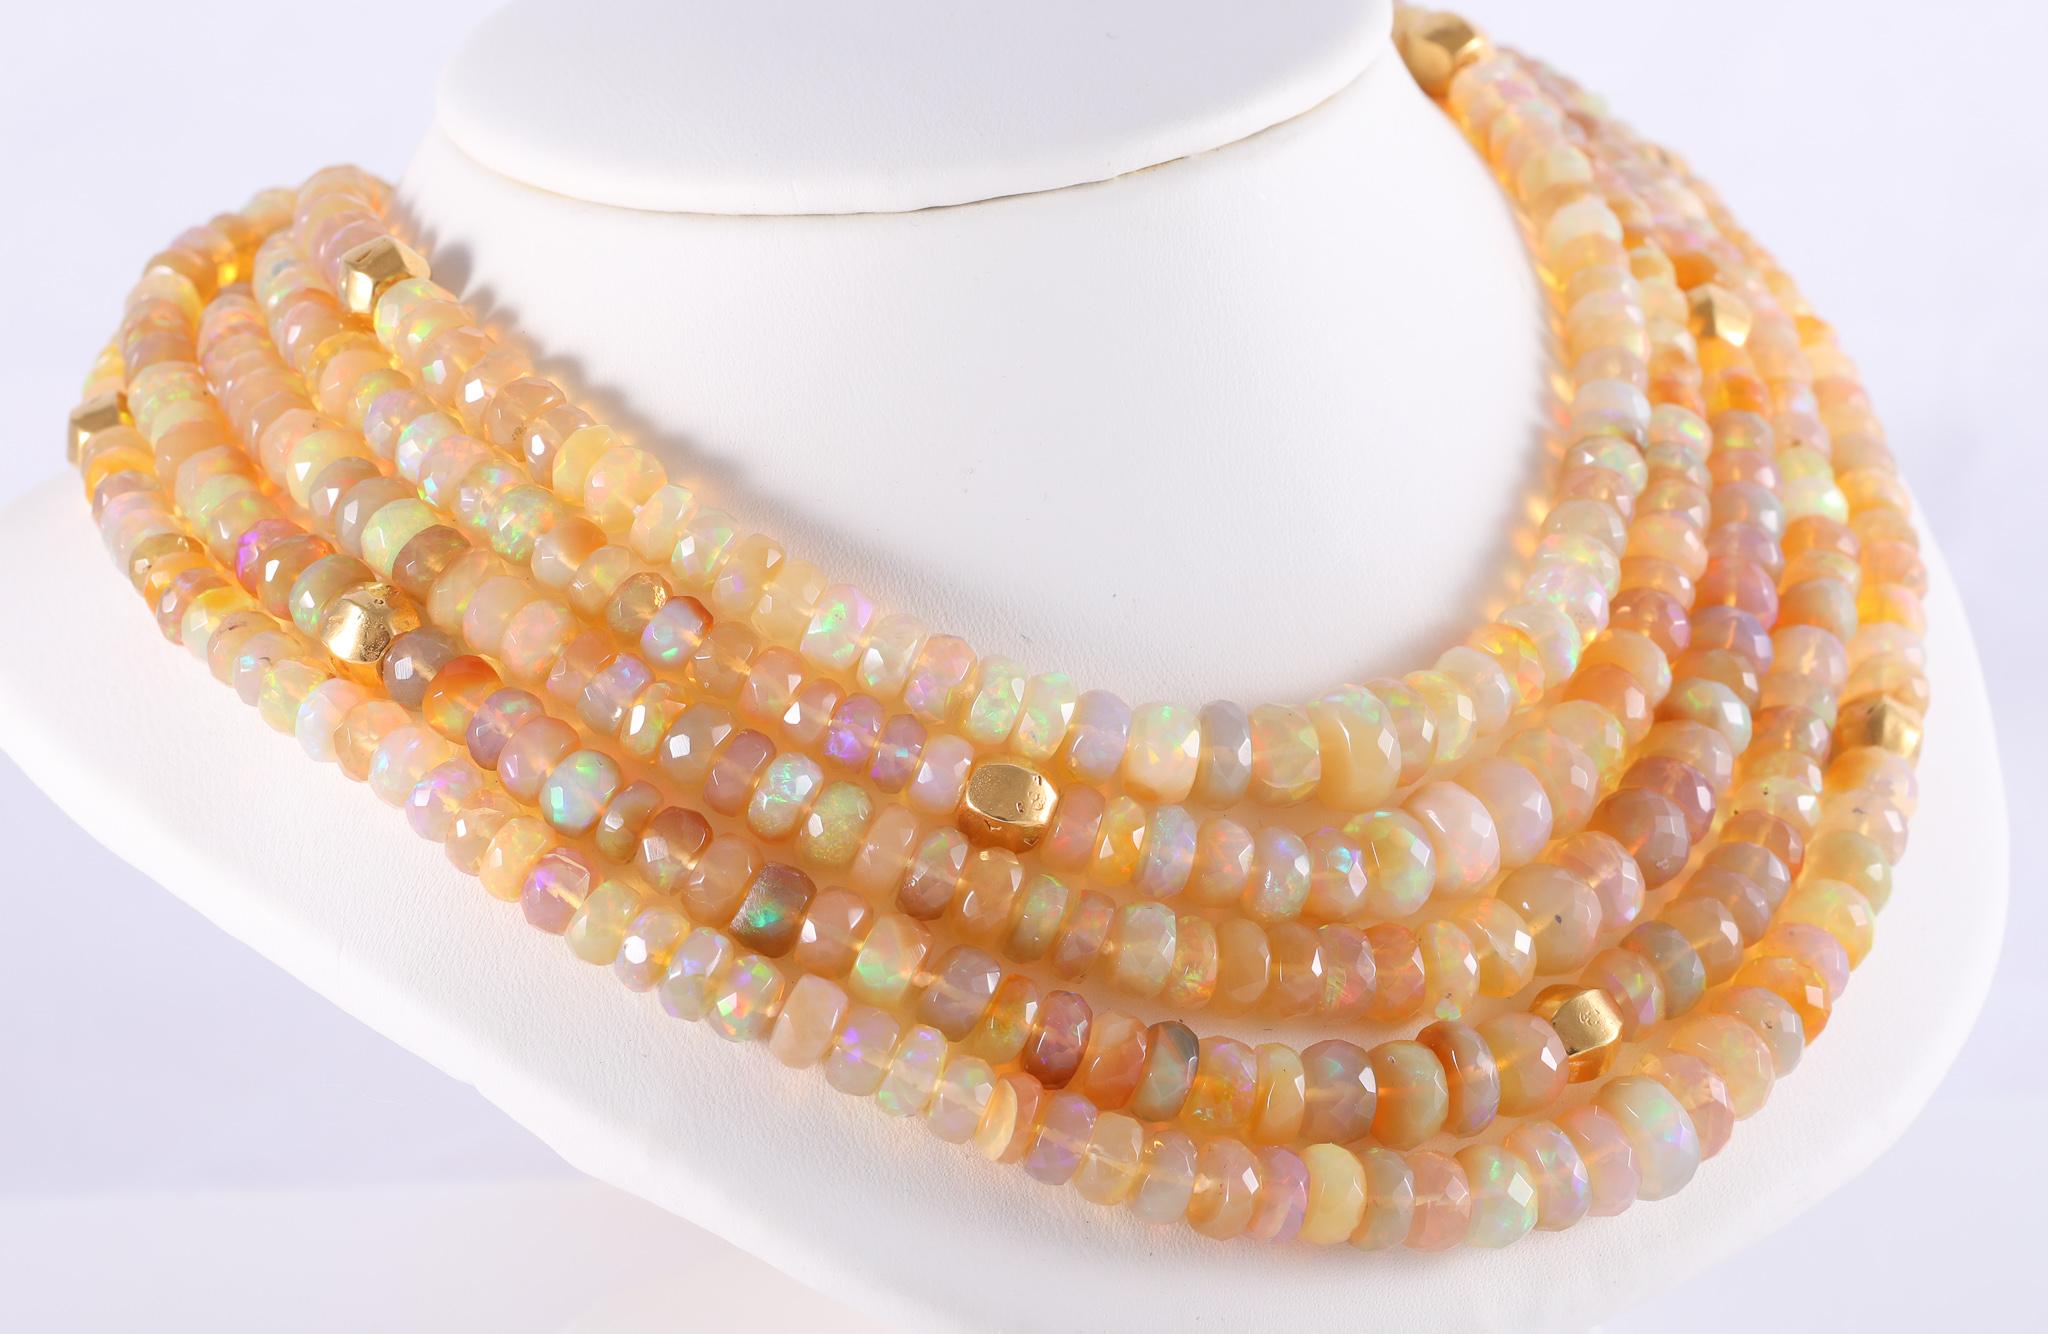 Five strands of fully saturated opal beads are accented with 18k yellow gold smooth beads. This is a sunshine necklace full of lively iridescent colors. These Ethiopian opal beads are rough cut faceted rondelles and have a more natural look, while